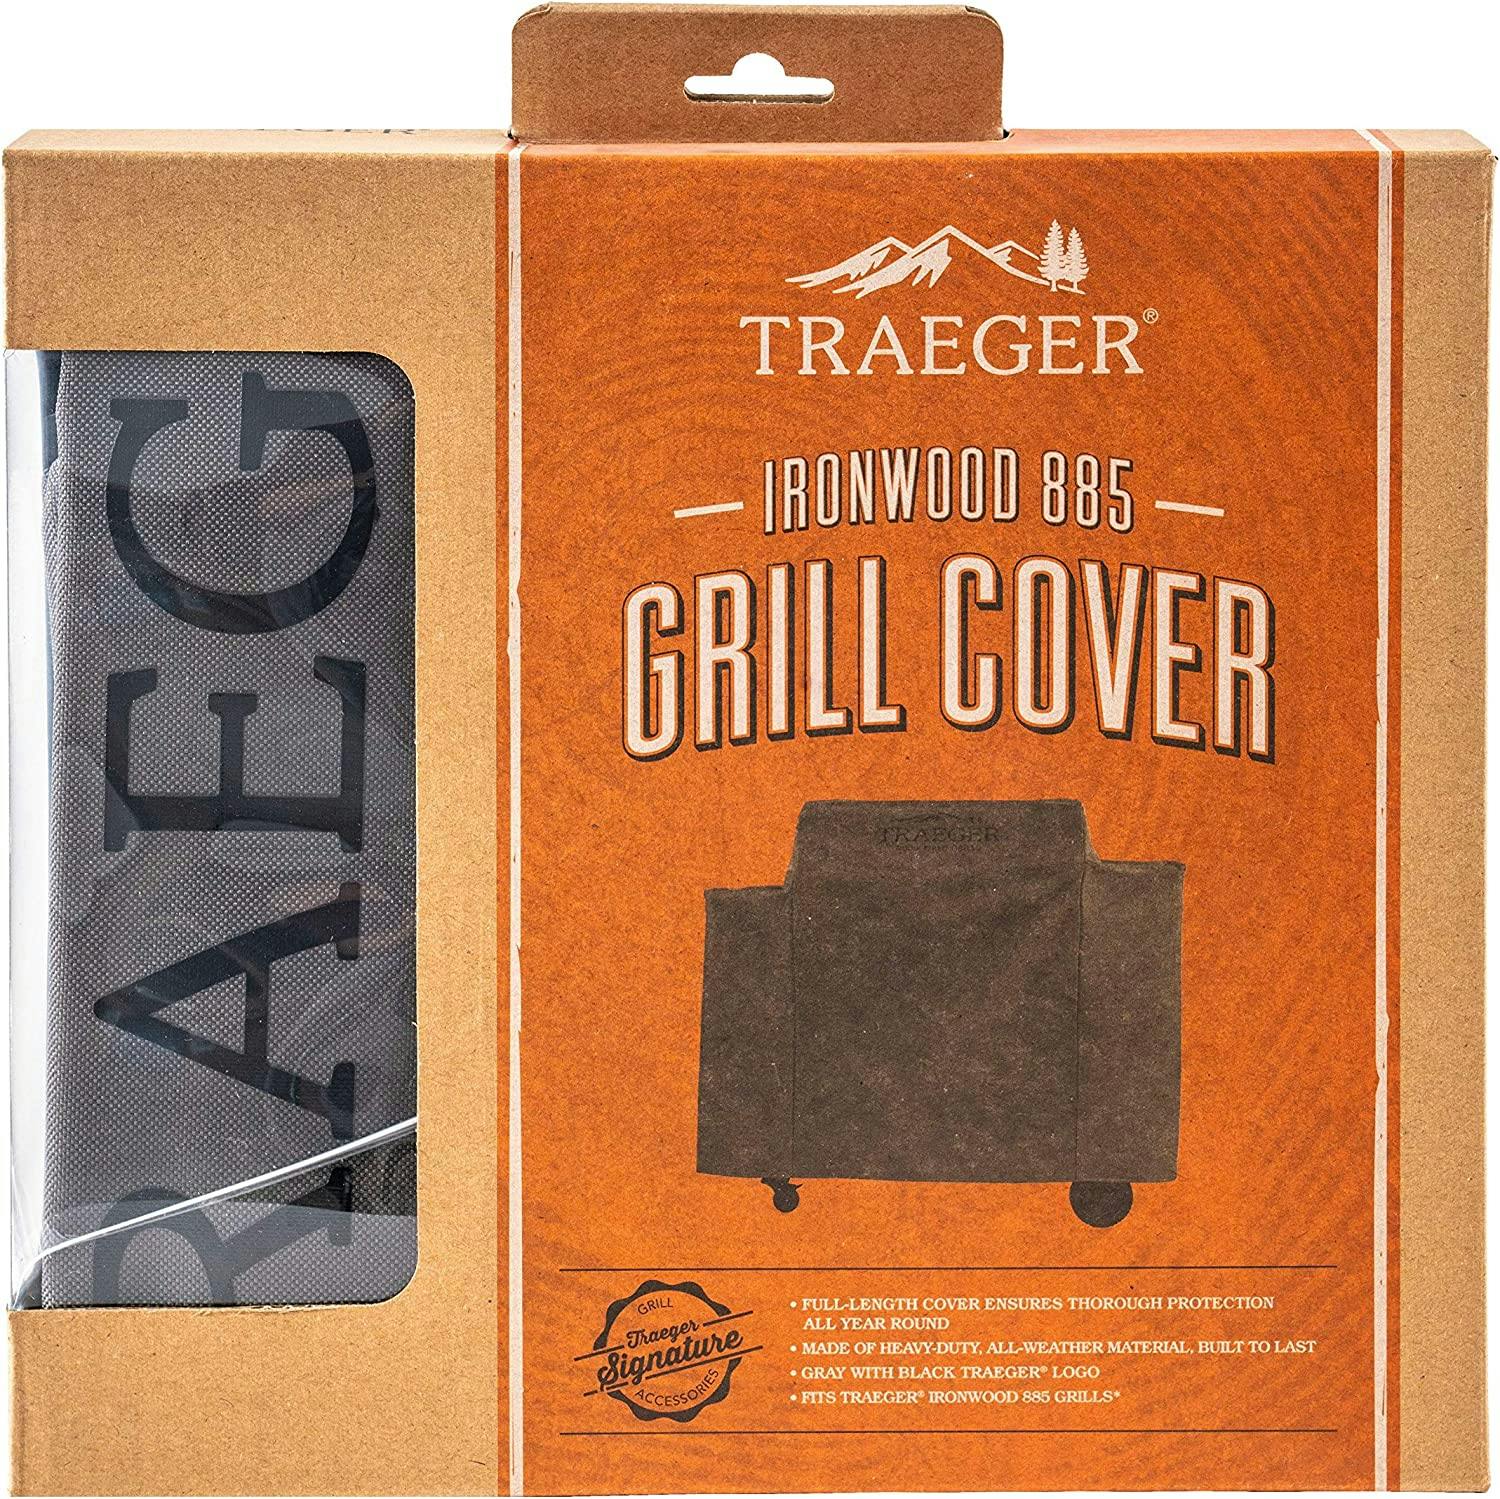 Traeger Full Length Grill Cover for Ironwood 885 Series Pellet Grills